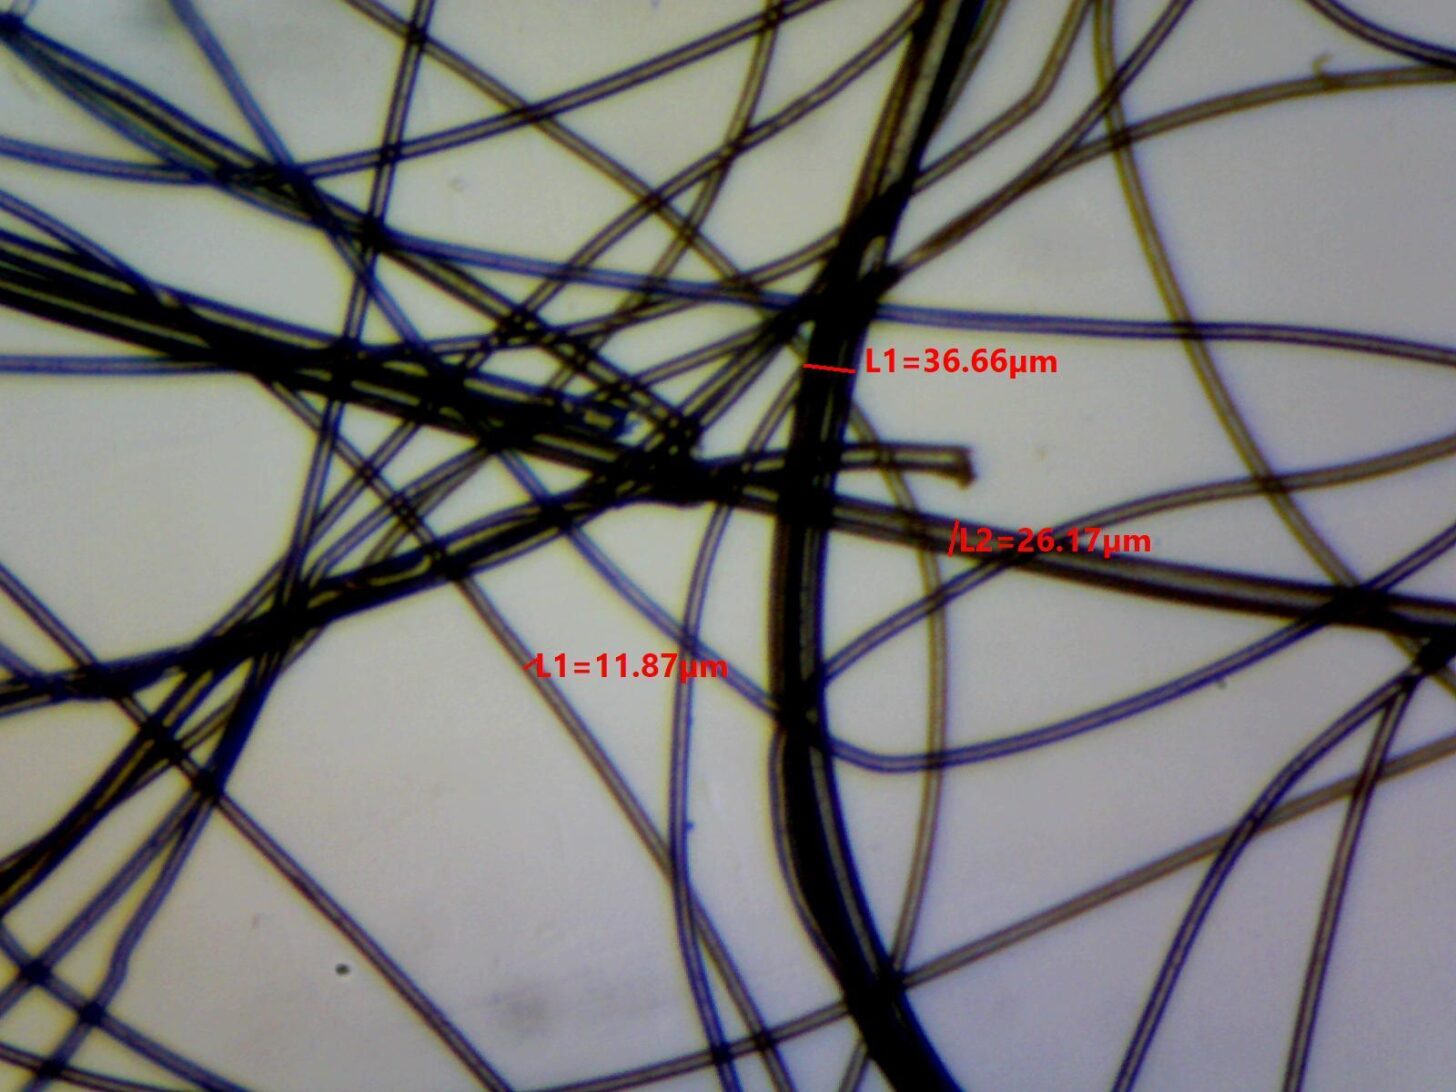 Primaloft Gold 3oz Photomicrograph showing measured fiber diameters of 11.87, 26.17, and 36.66 microns.